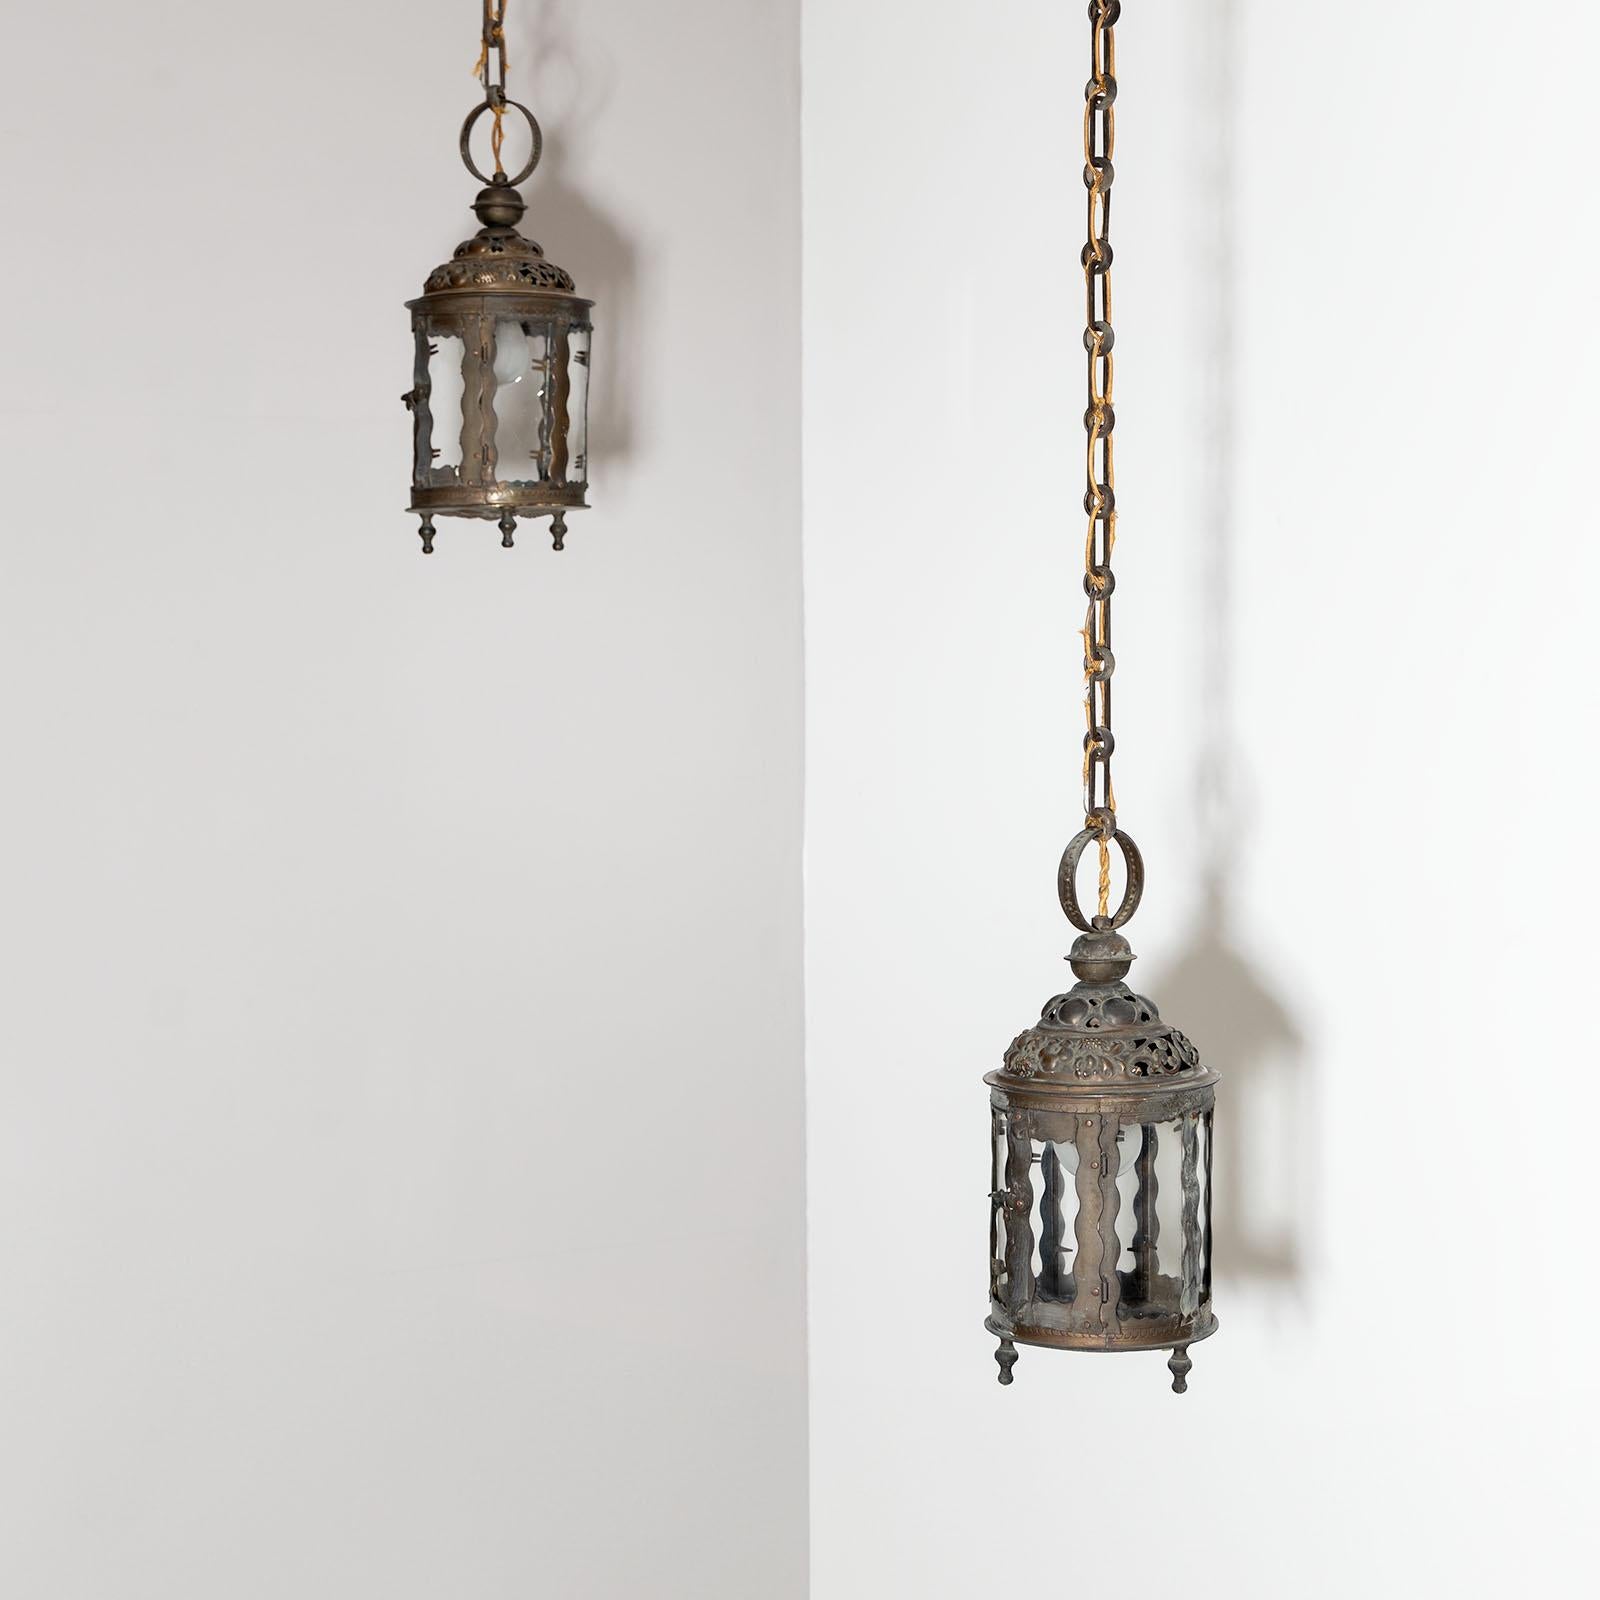 Pair of copper lanterns as hanging lamps with small door, glass panes and long link chain. The lanterns have an old electrification and need to be rewired. Lamp dimensions: 38 x 16 x 16 cm; length with chain: 80 / 140 cm.